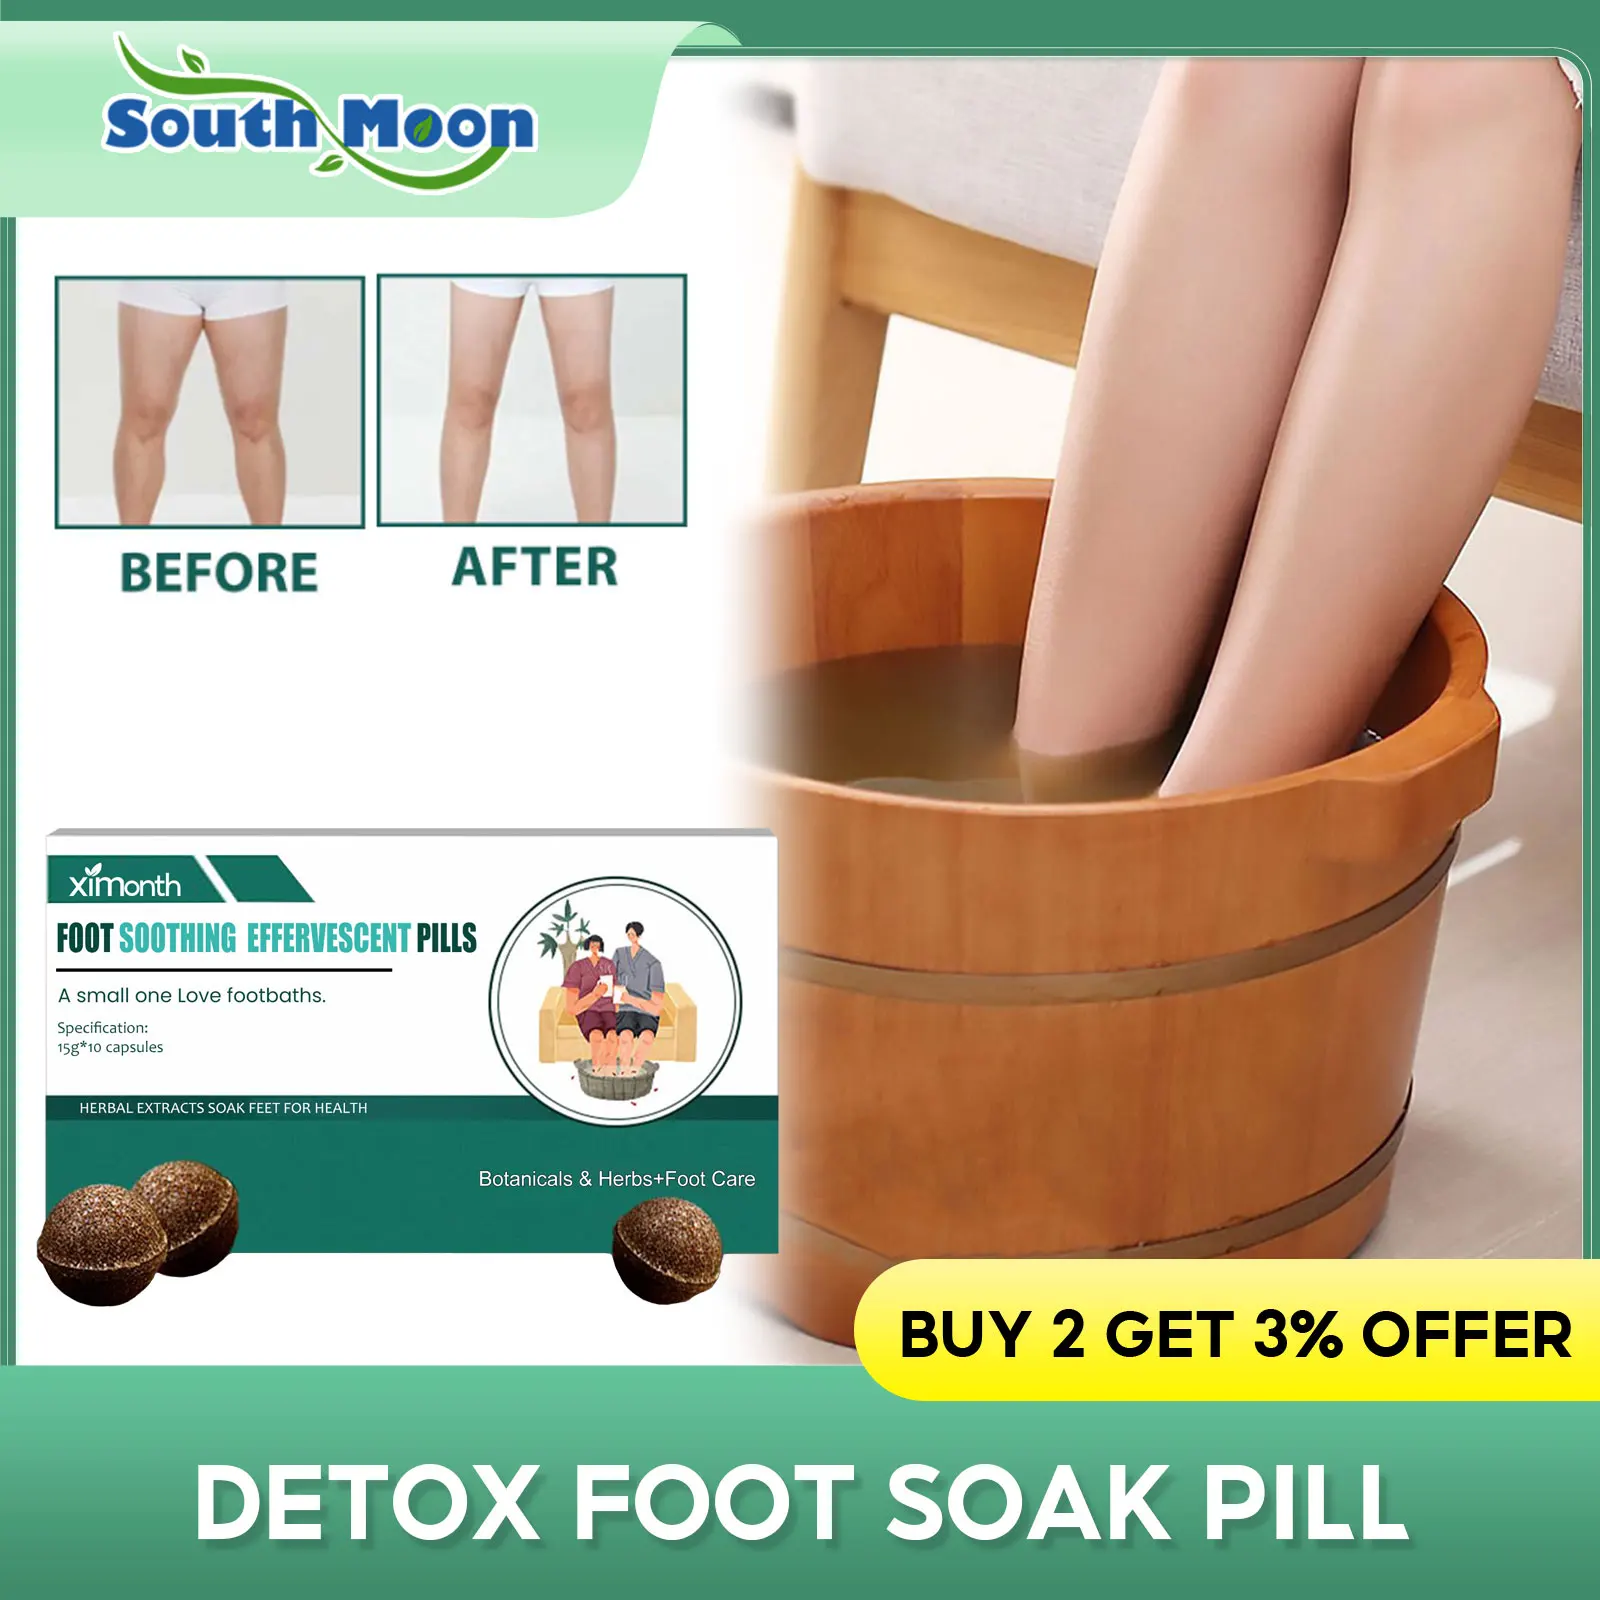 

Detox Foot Soak Tablet Weight Loss Relieve Fatigue Stress Foot Detoxifying Improve Sleep Relaxation Cleansing Slimming Foot Bath